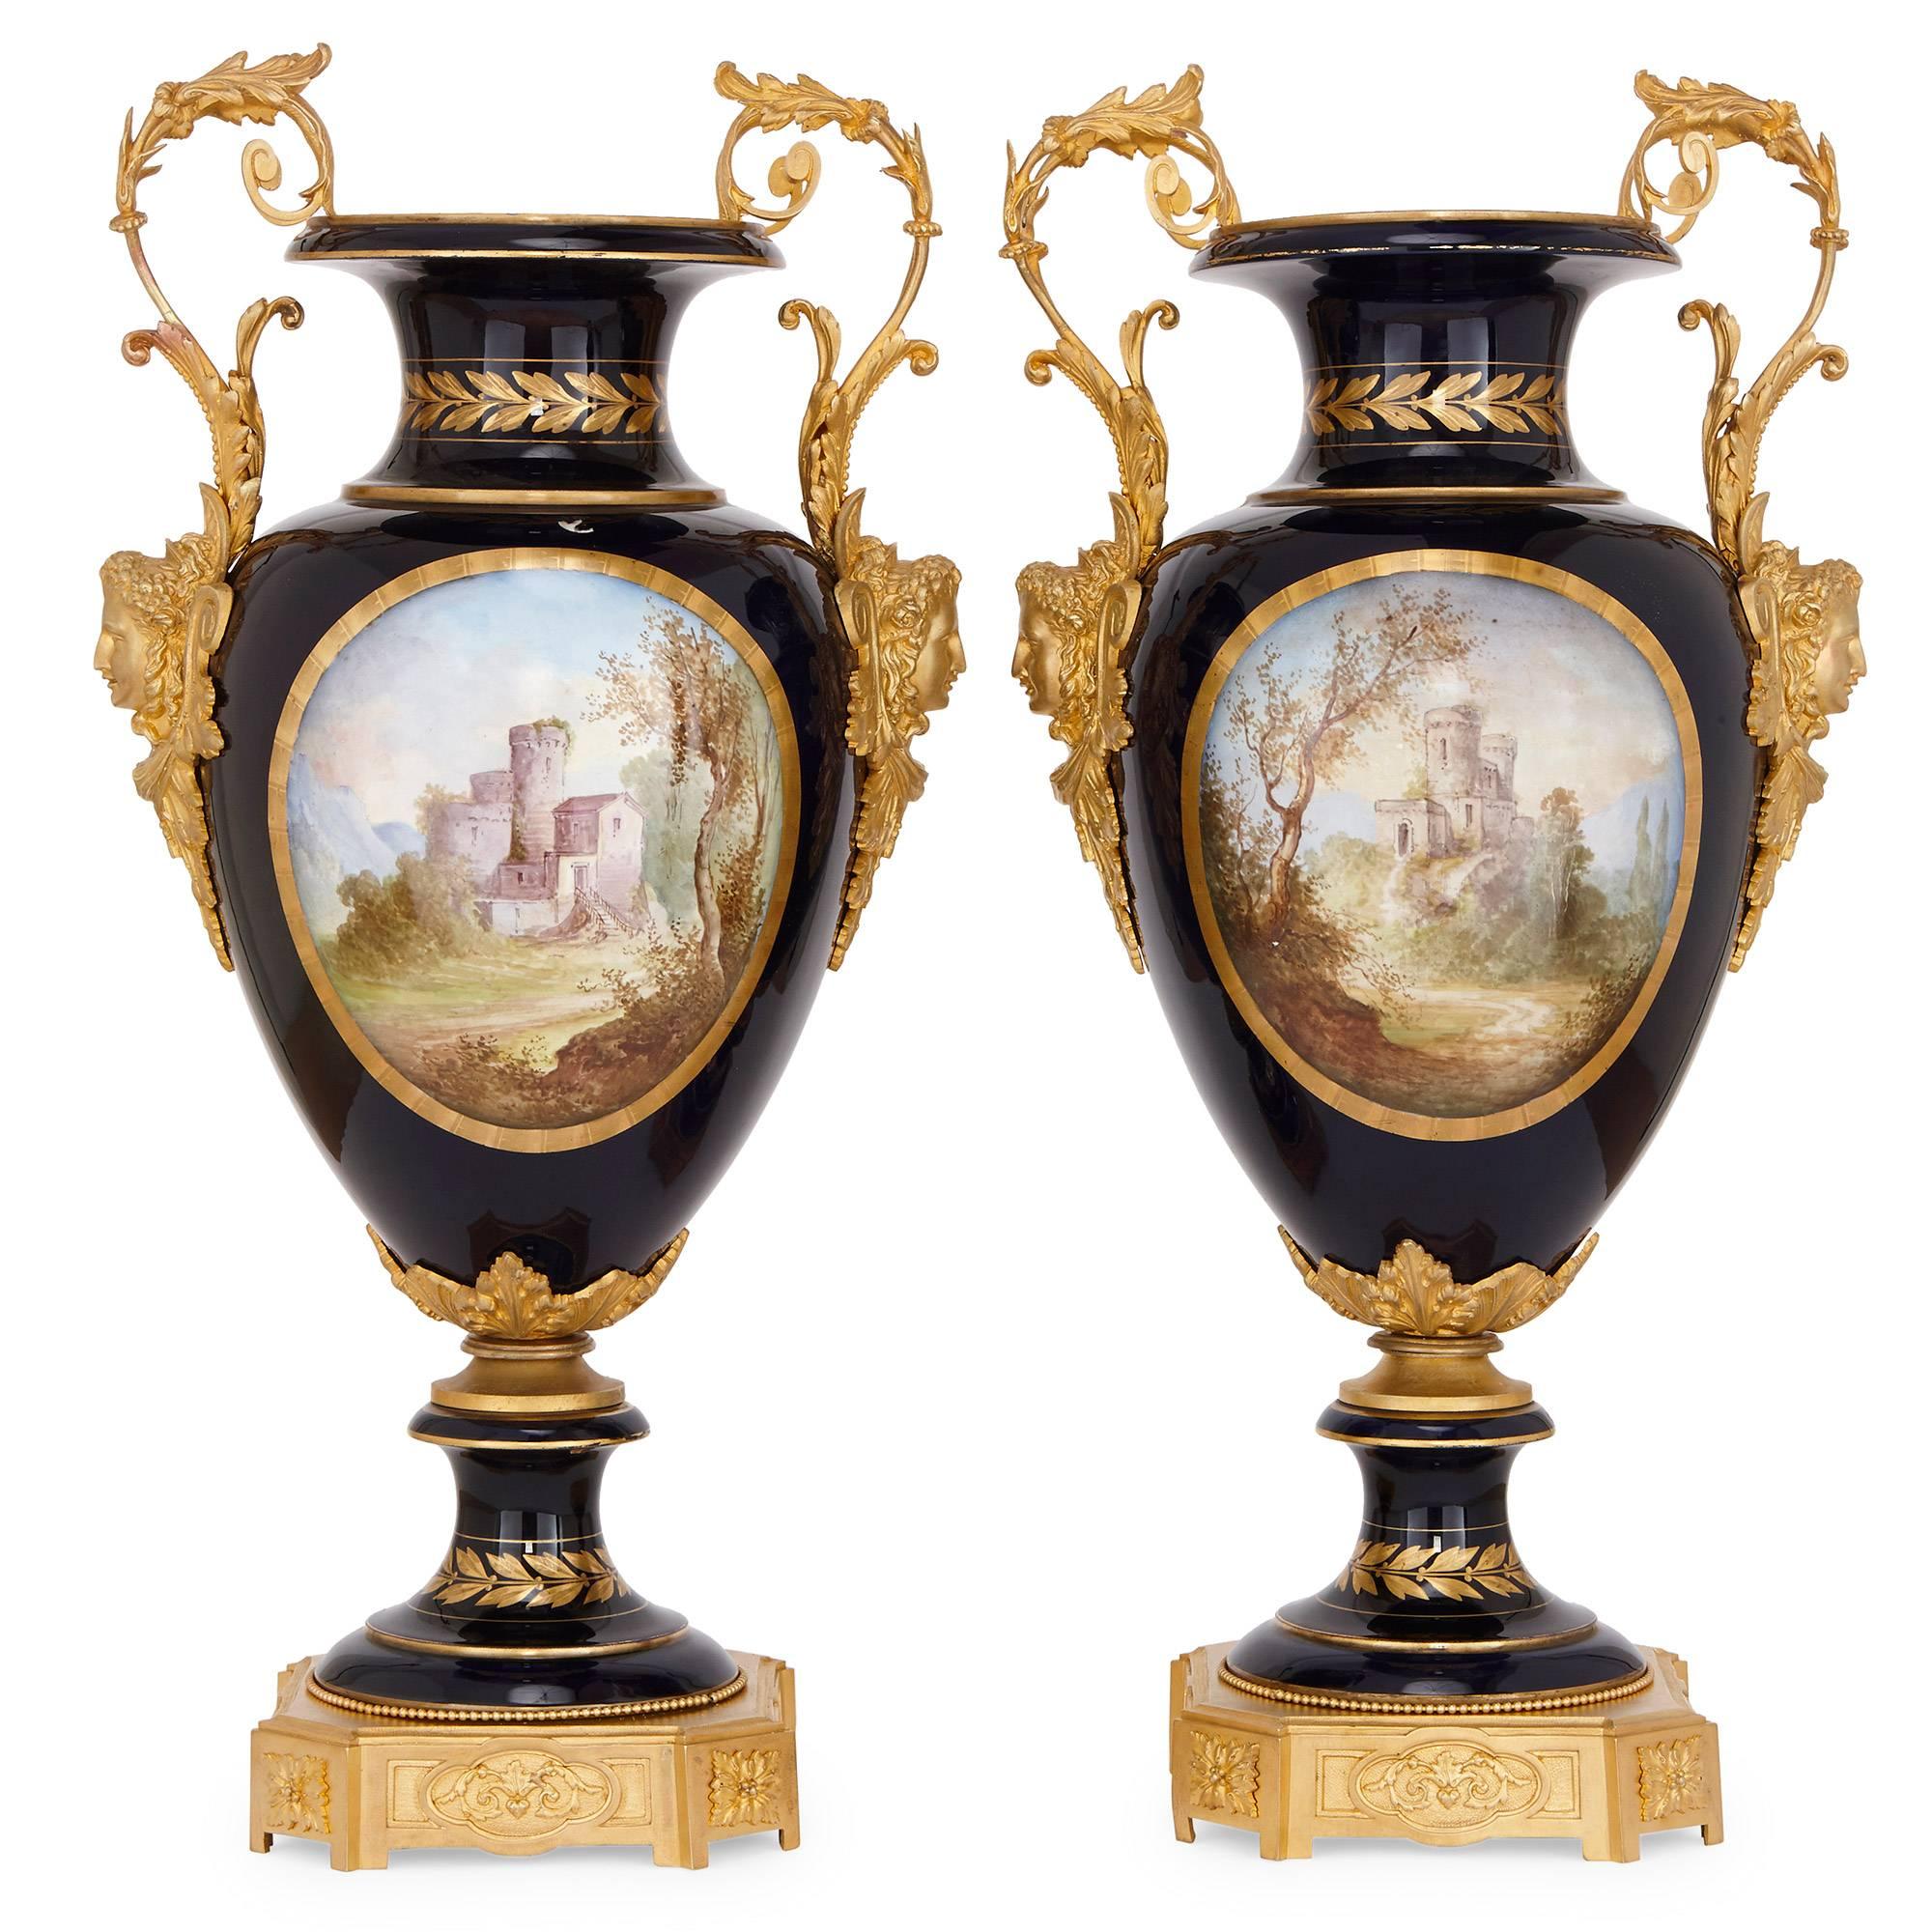 The pair of vases are each crafted in baluster form porcelain with a deep, ink blue ground, and feature waisted socle bases and waisted necks with flared rims. The base of each porcelain vase is set onto an ormolu plinth of square form with canted